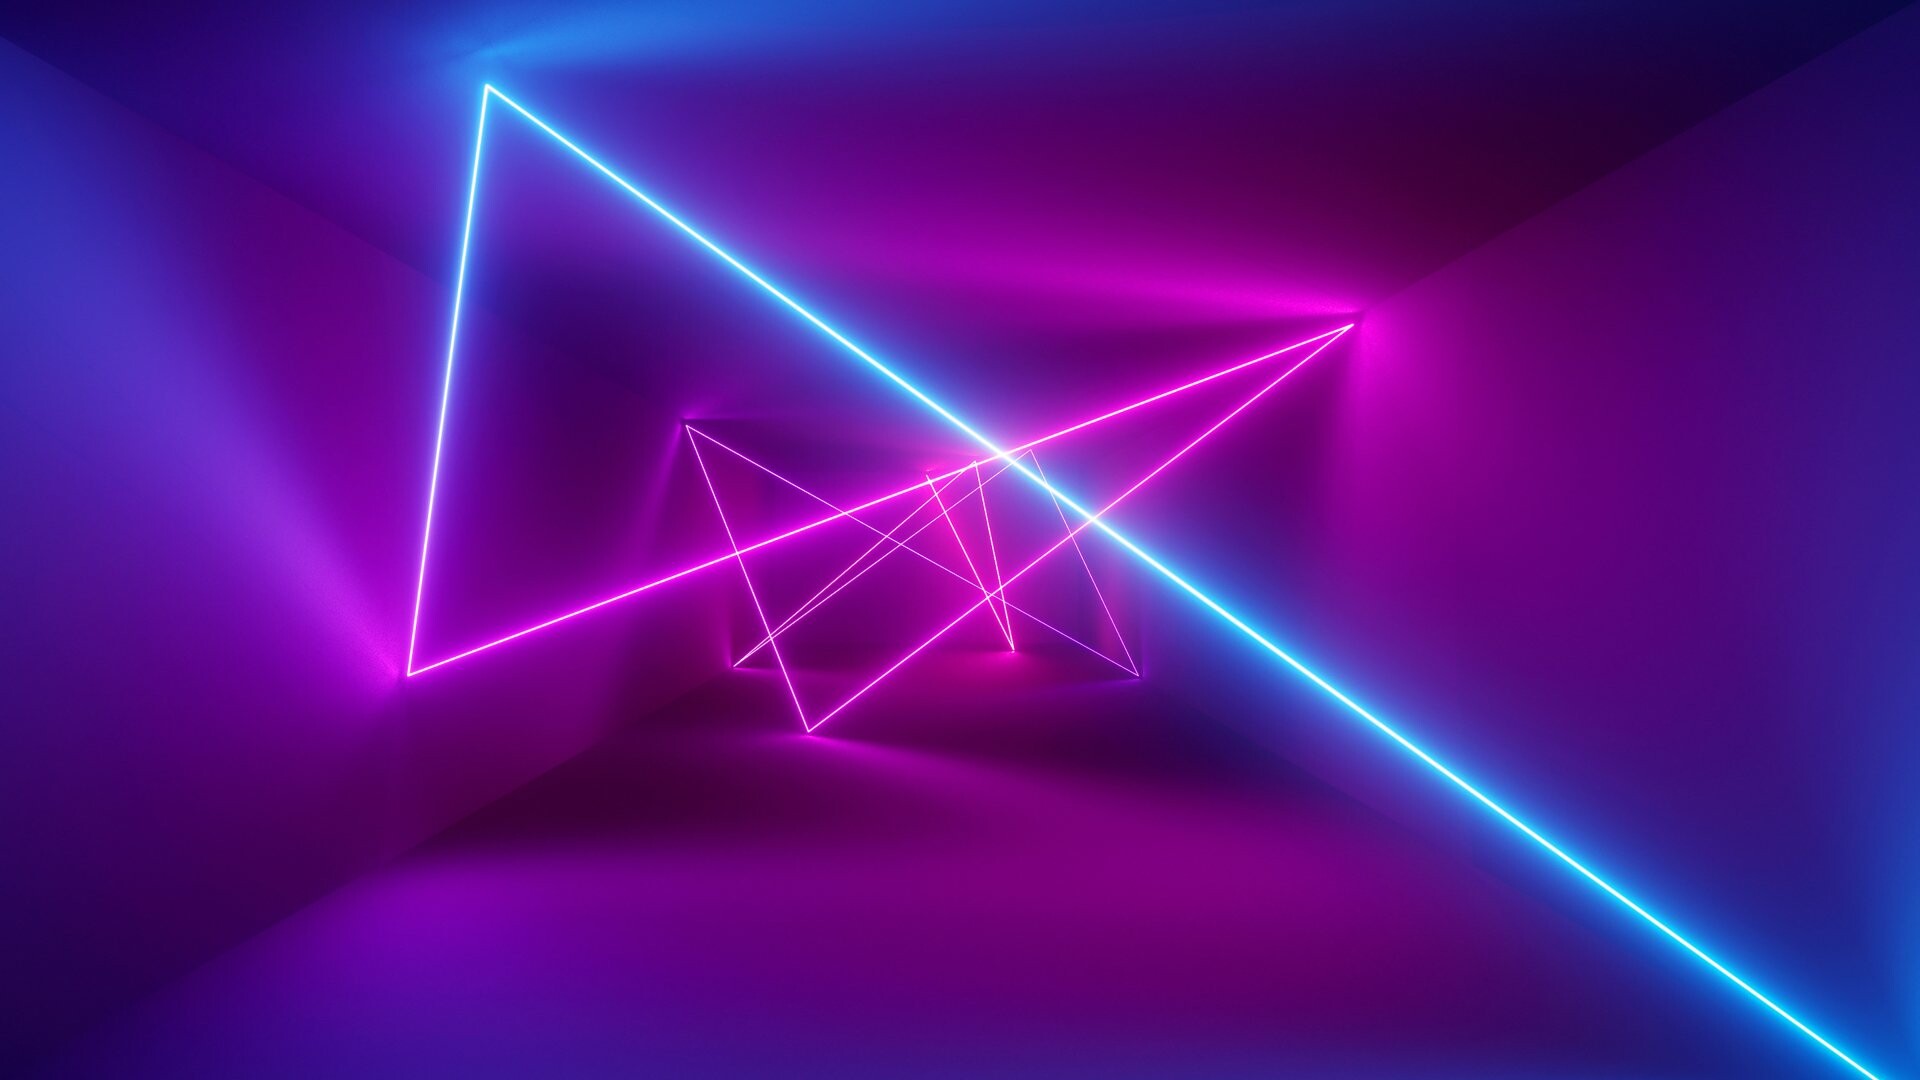 Neon: Can be seen in art, fashion, interior design, and digital art. 1920x1080 Full HD Background.